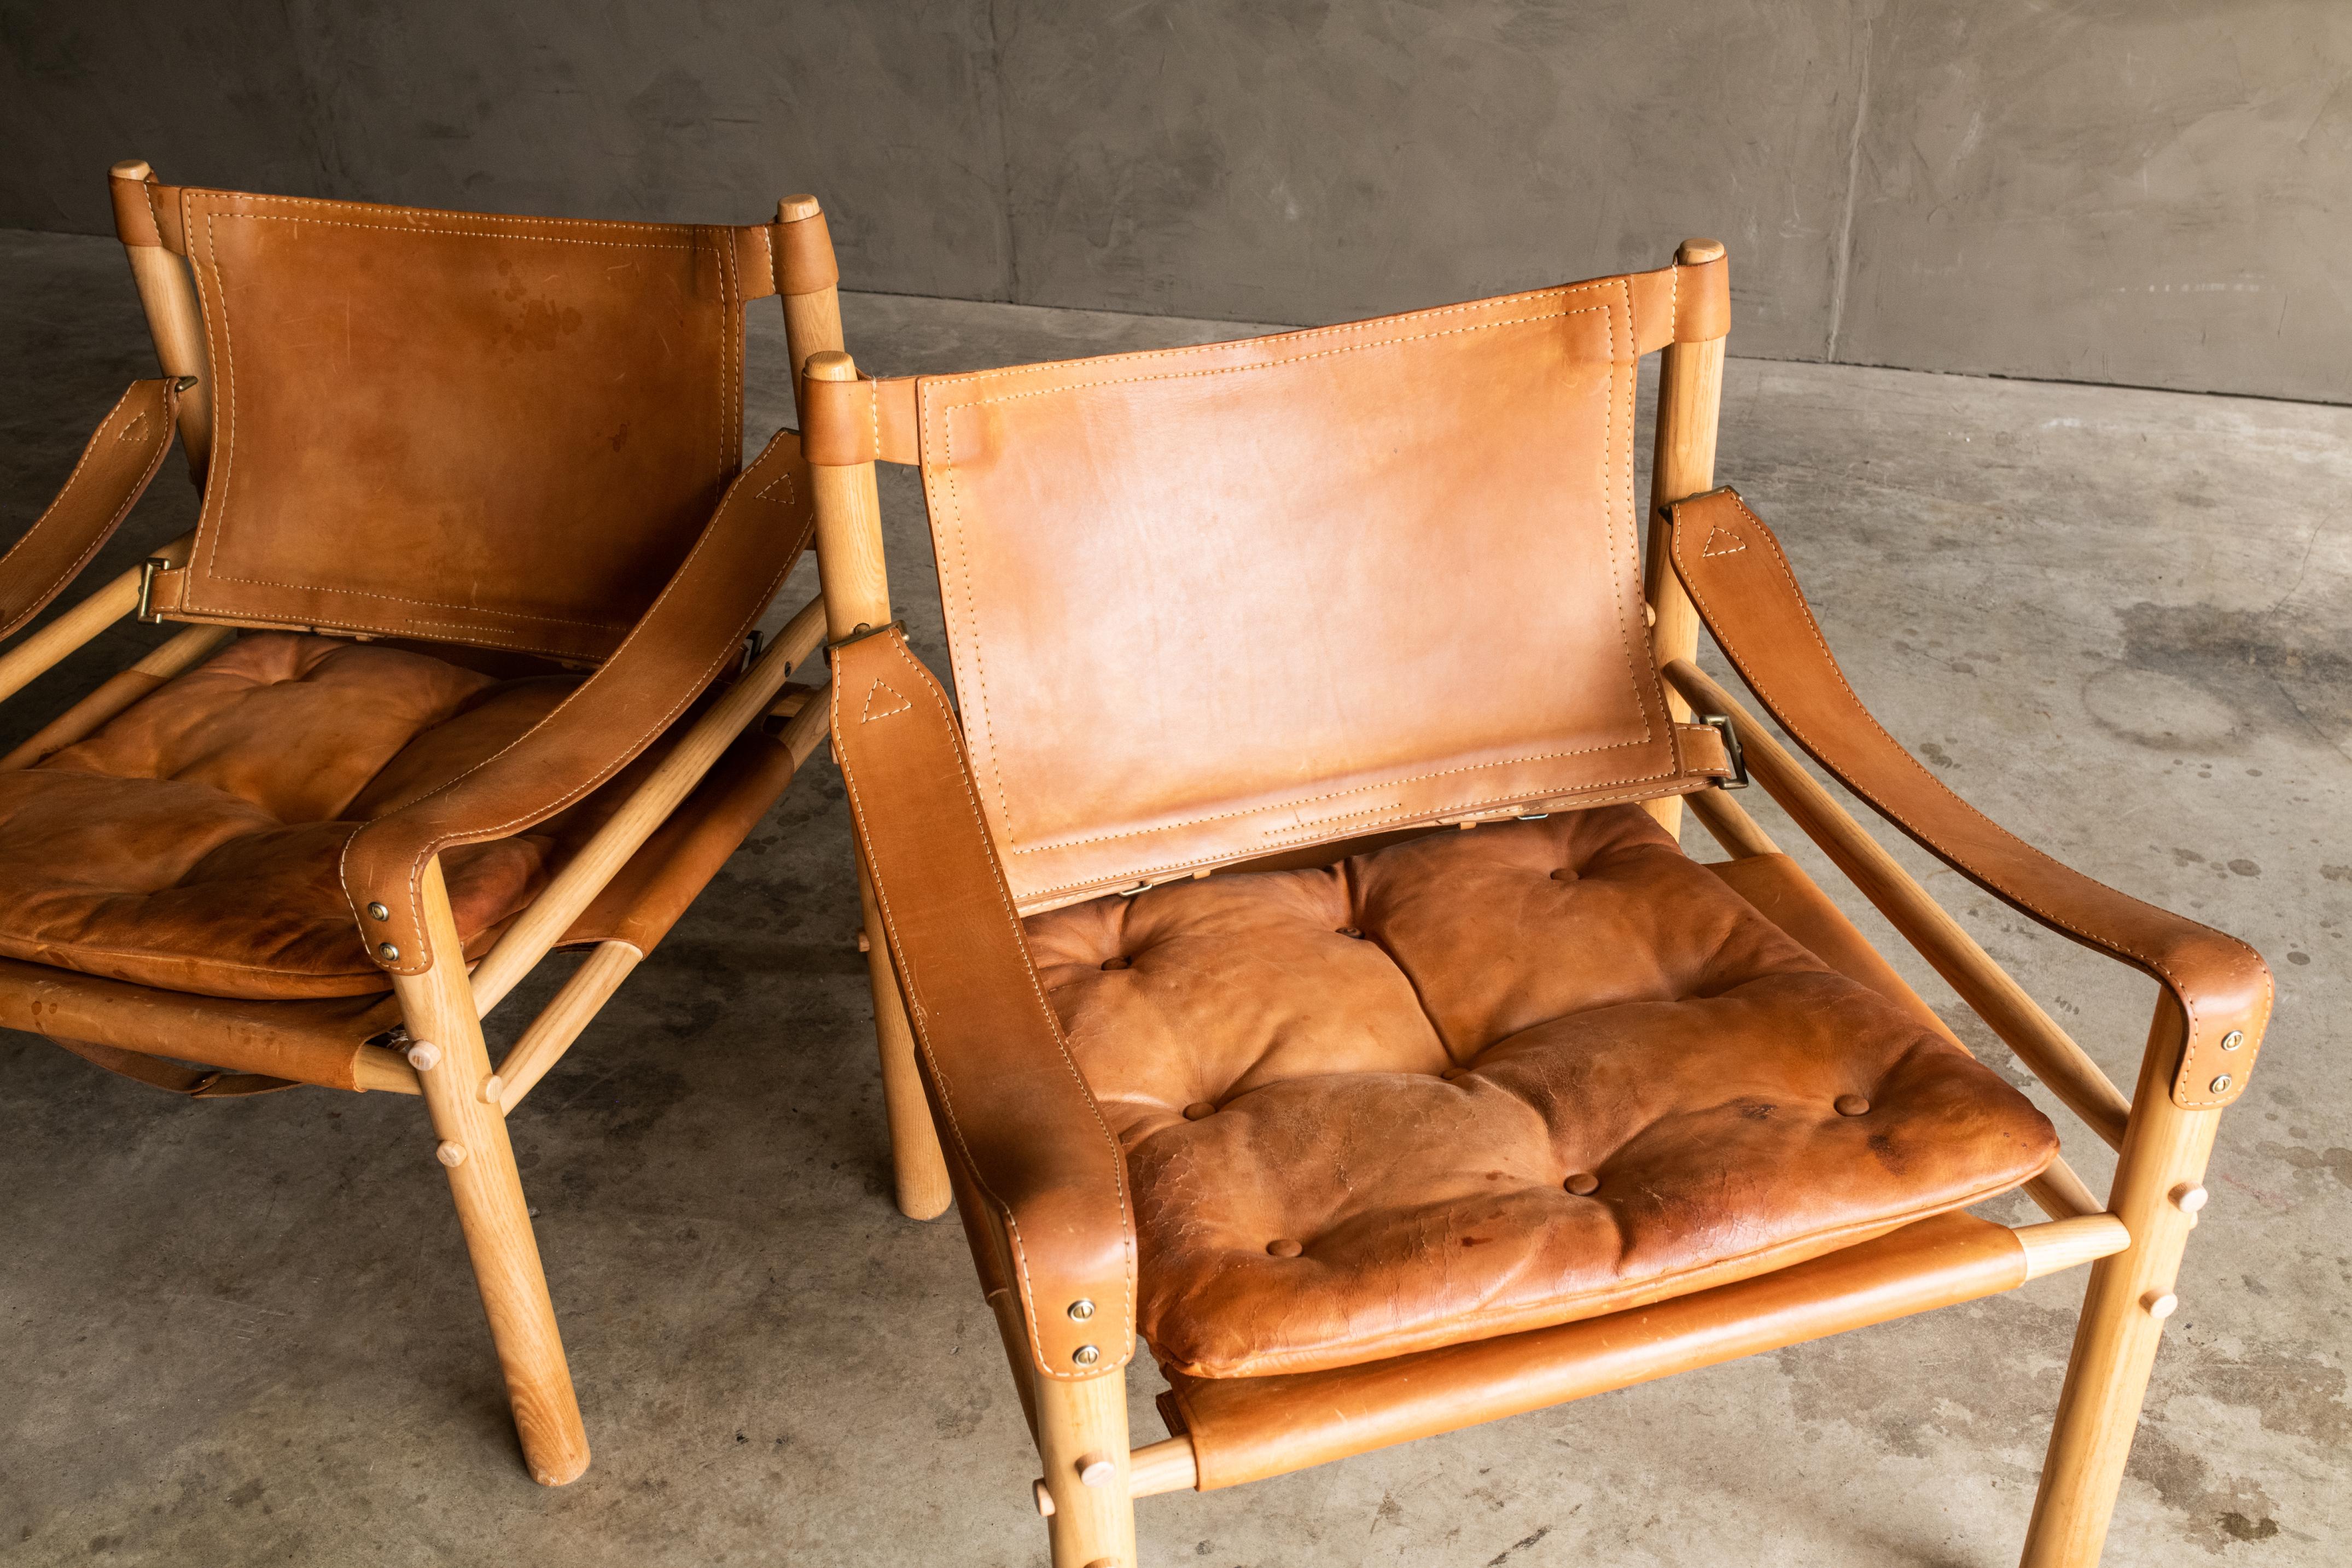 Pair of Arne Norell Safari lounge chairs, Model Sirocco, Sweden, 1970s. Original cognac leather with nice wear and patina.